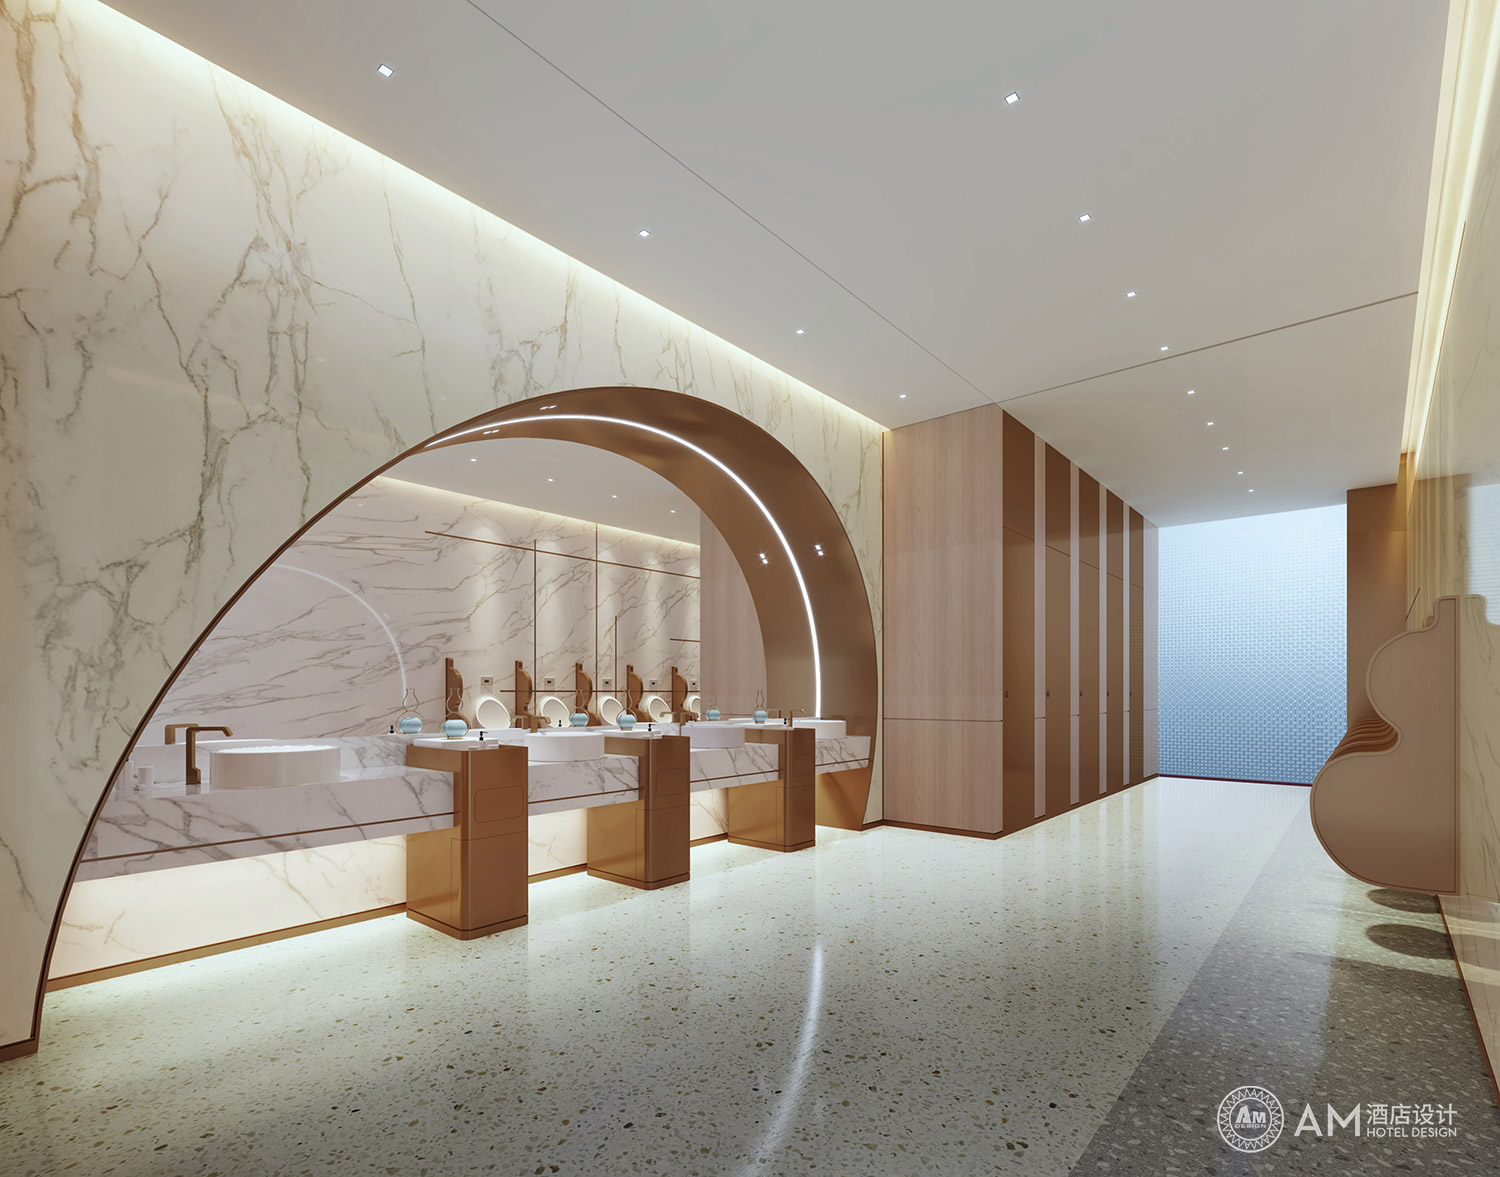 AM DESIGN | Bathroom design of Liaoning Hundred and Beautiful Hotels